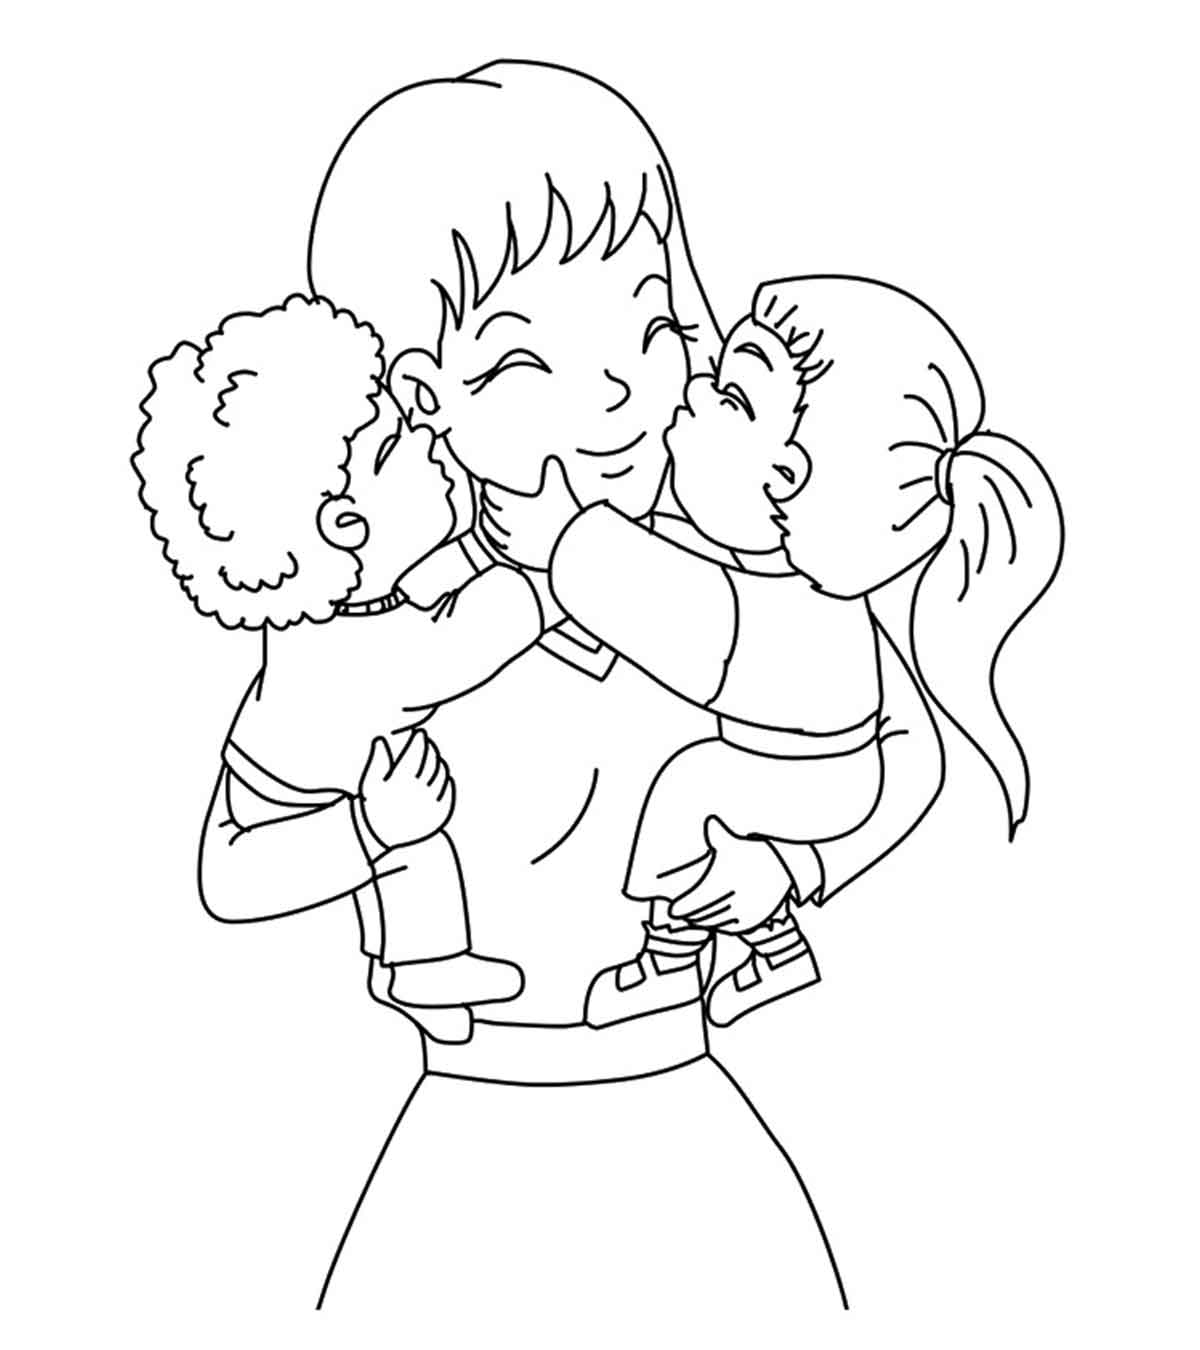 Top 20 Mother’s Day Coloring Pages For Toddlers